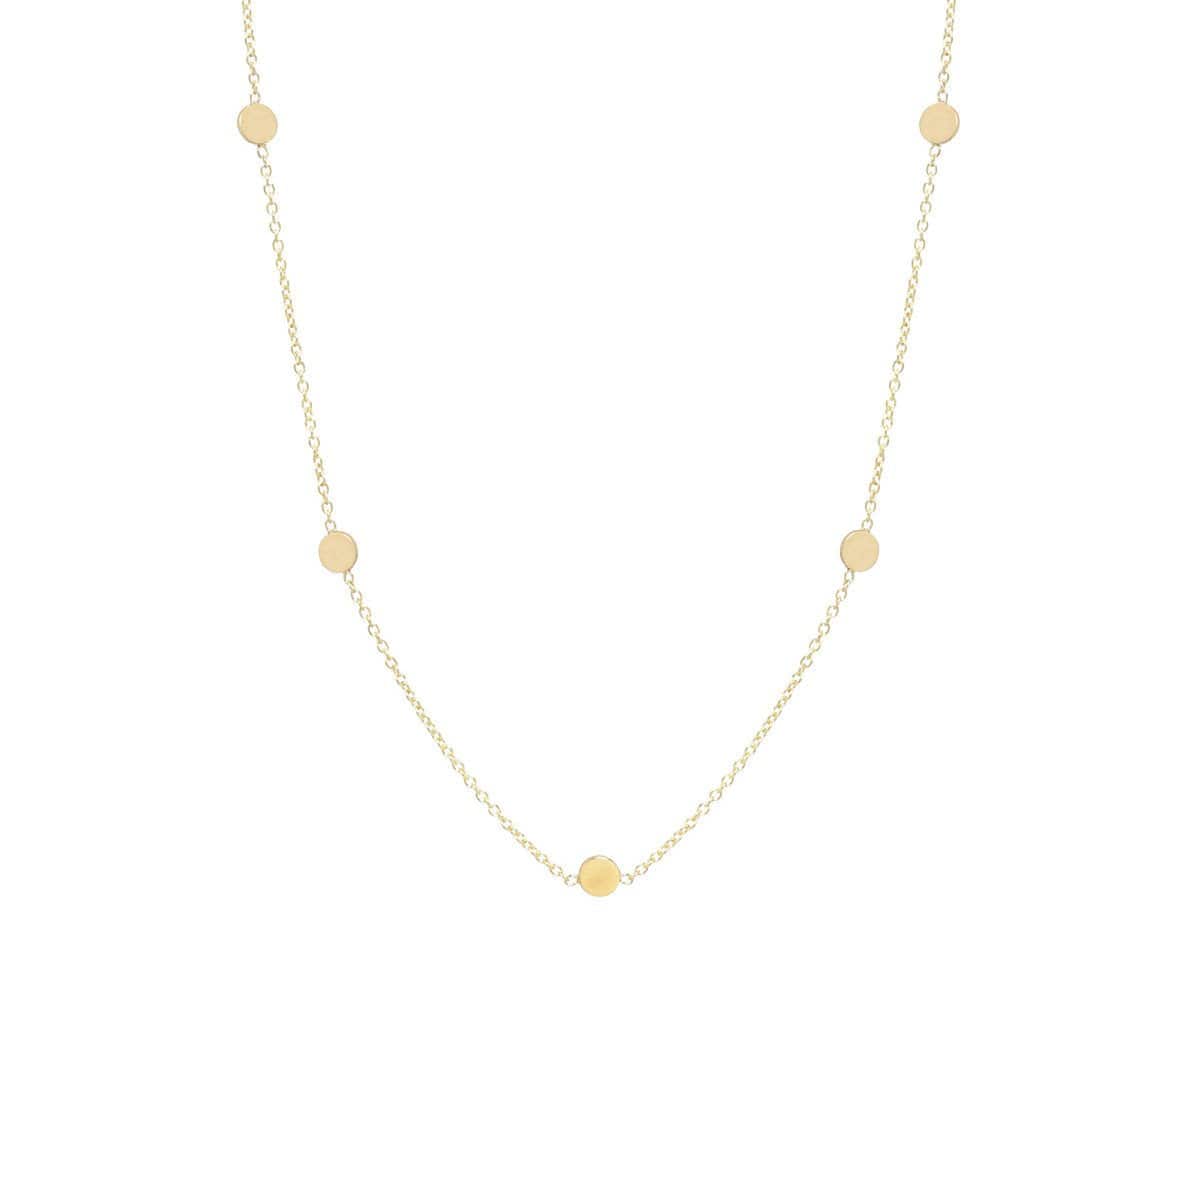 NKL-14K 14k Gold 5 Itty Bitty Round Disc Necklace